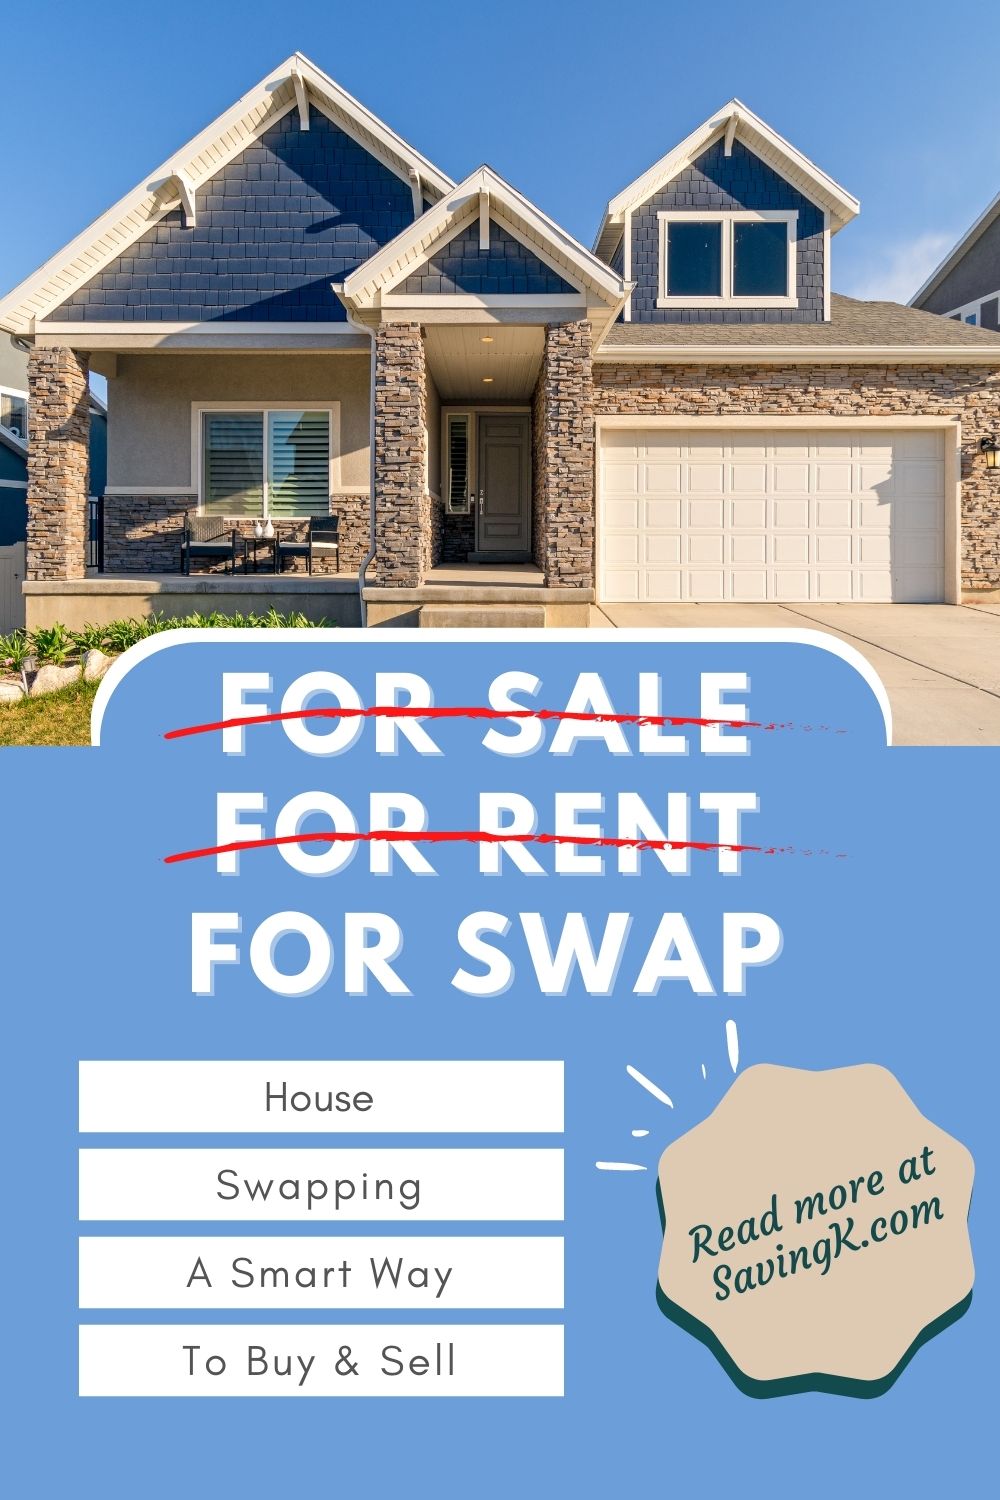 House Swapping: A Smart Way To Buy & Sell